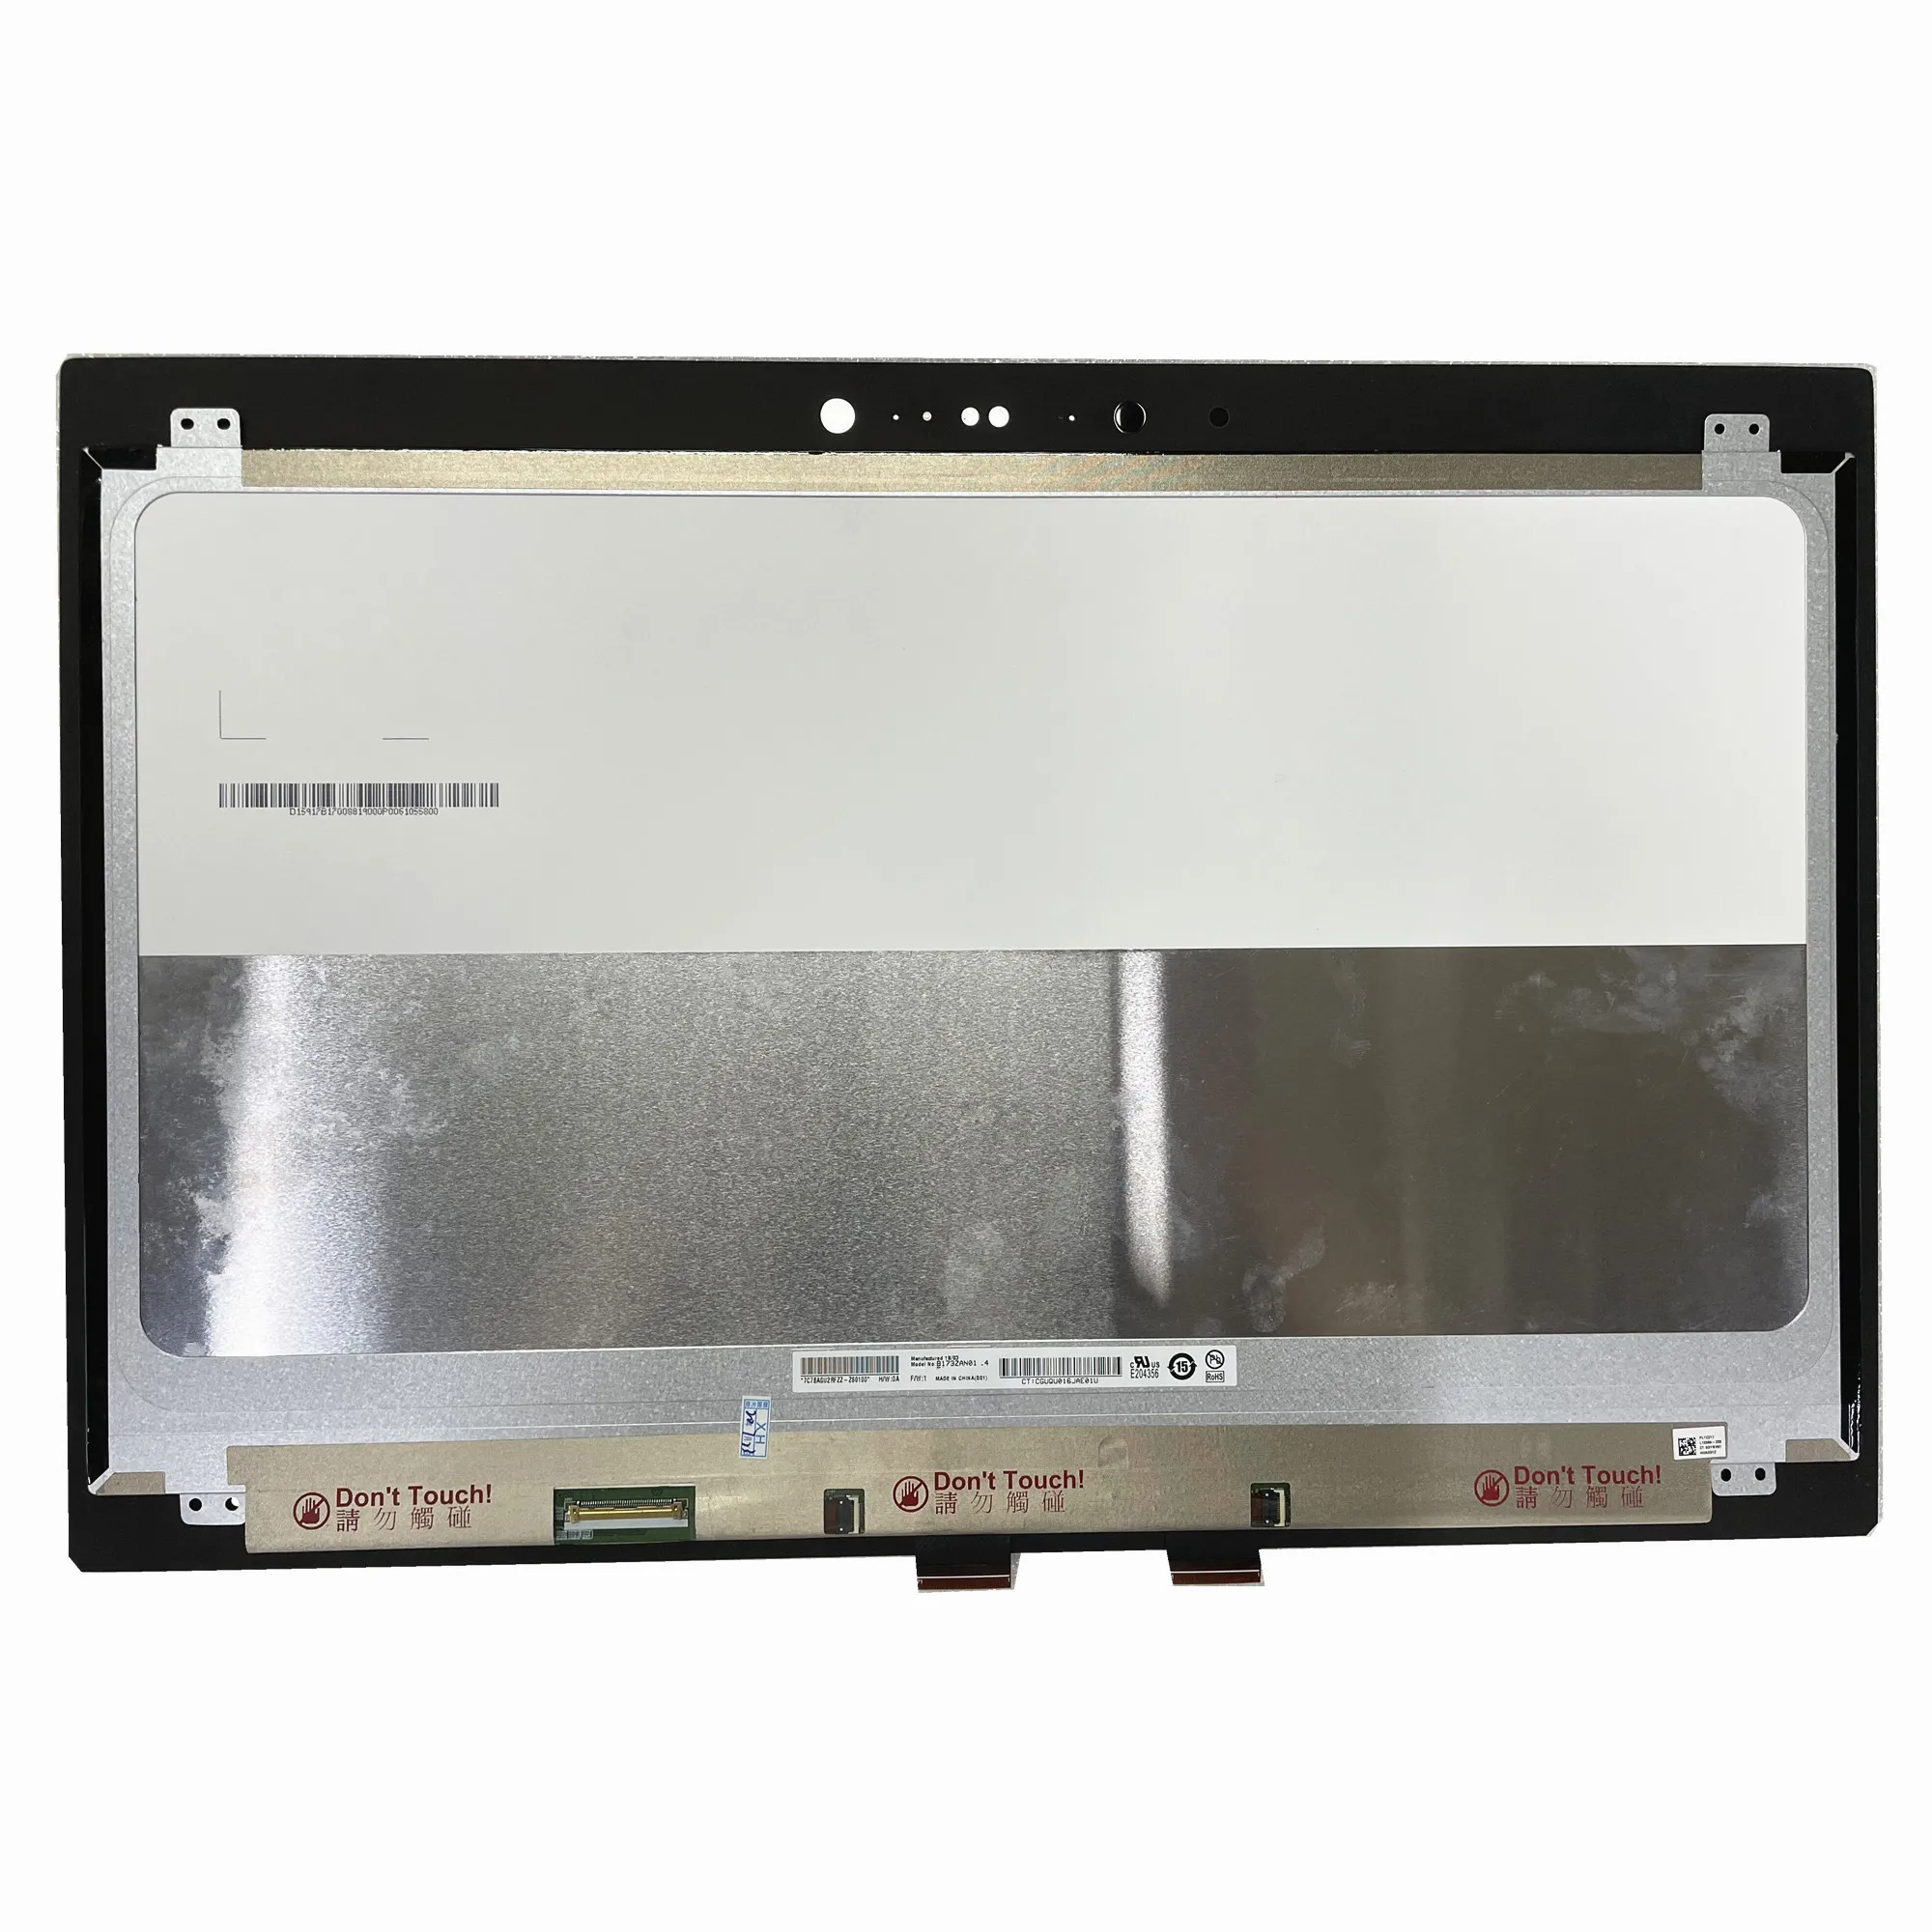 

B173ZAN01.4 17.3''Laptop LCD Touch Screen Display Panel Assembly for HP 3840*2160 IPS